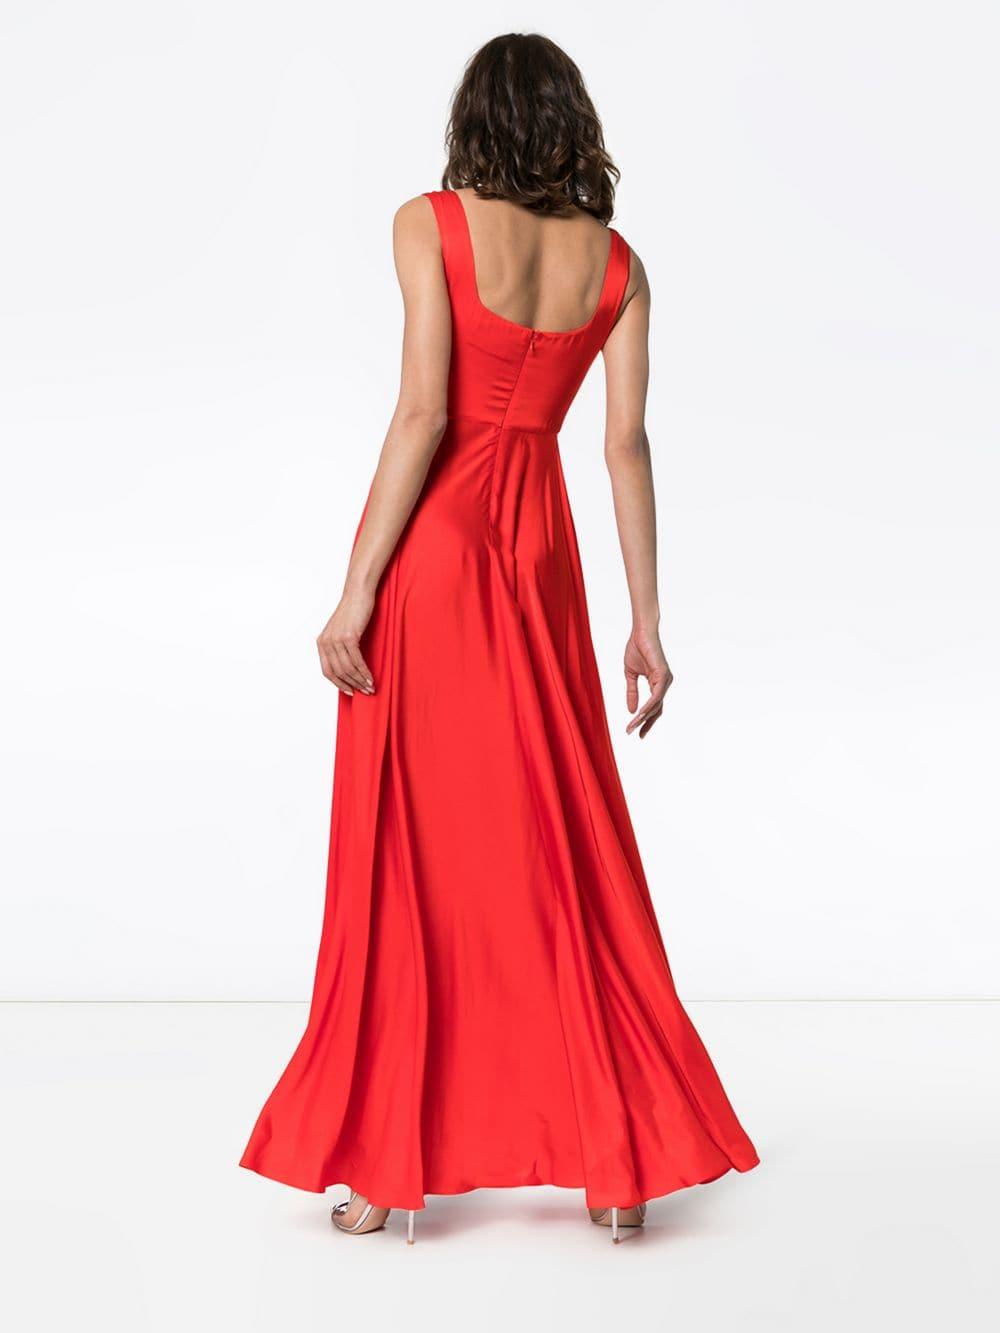 Solace London Naie Satin Maxi-dress in Red - Lyst